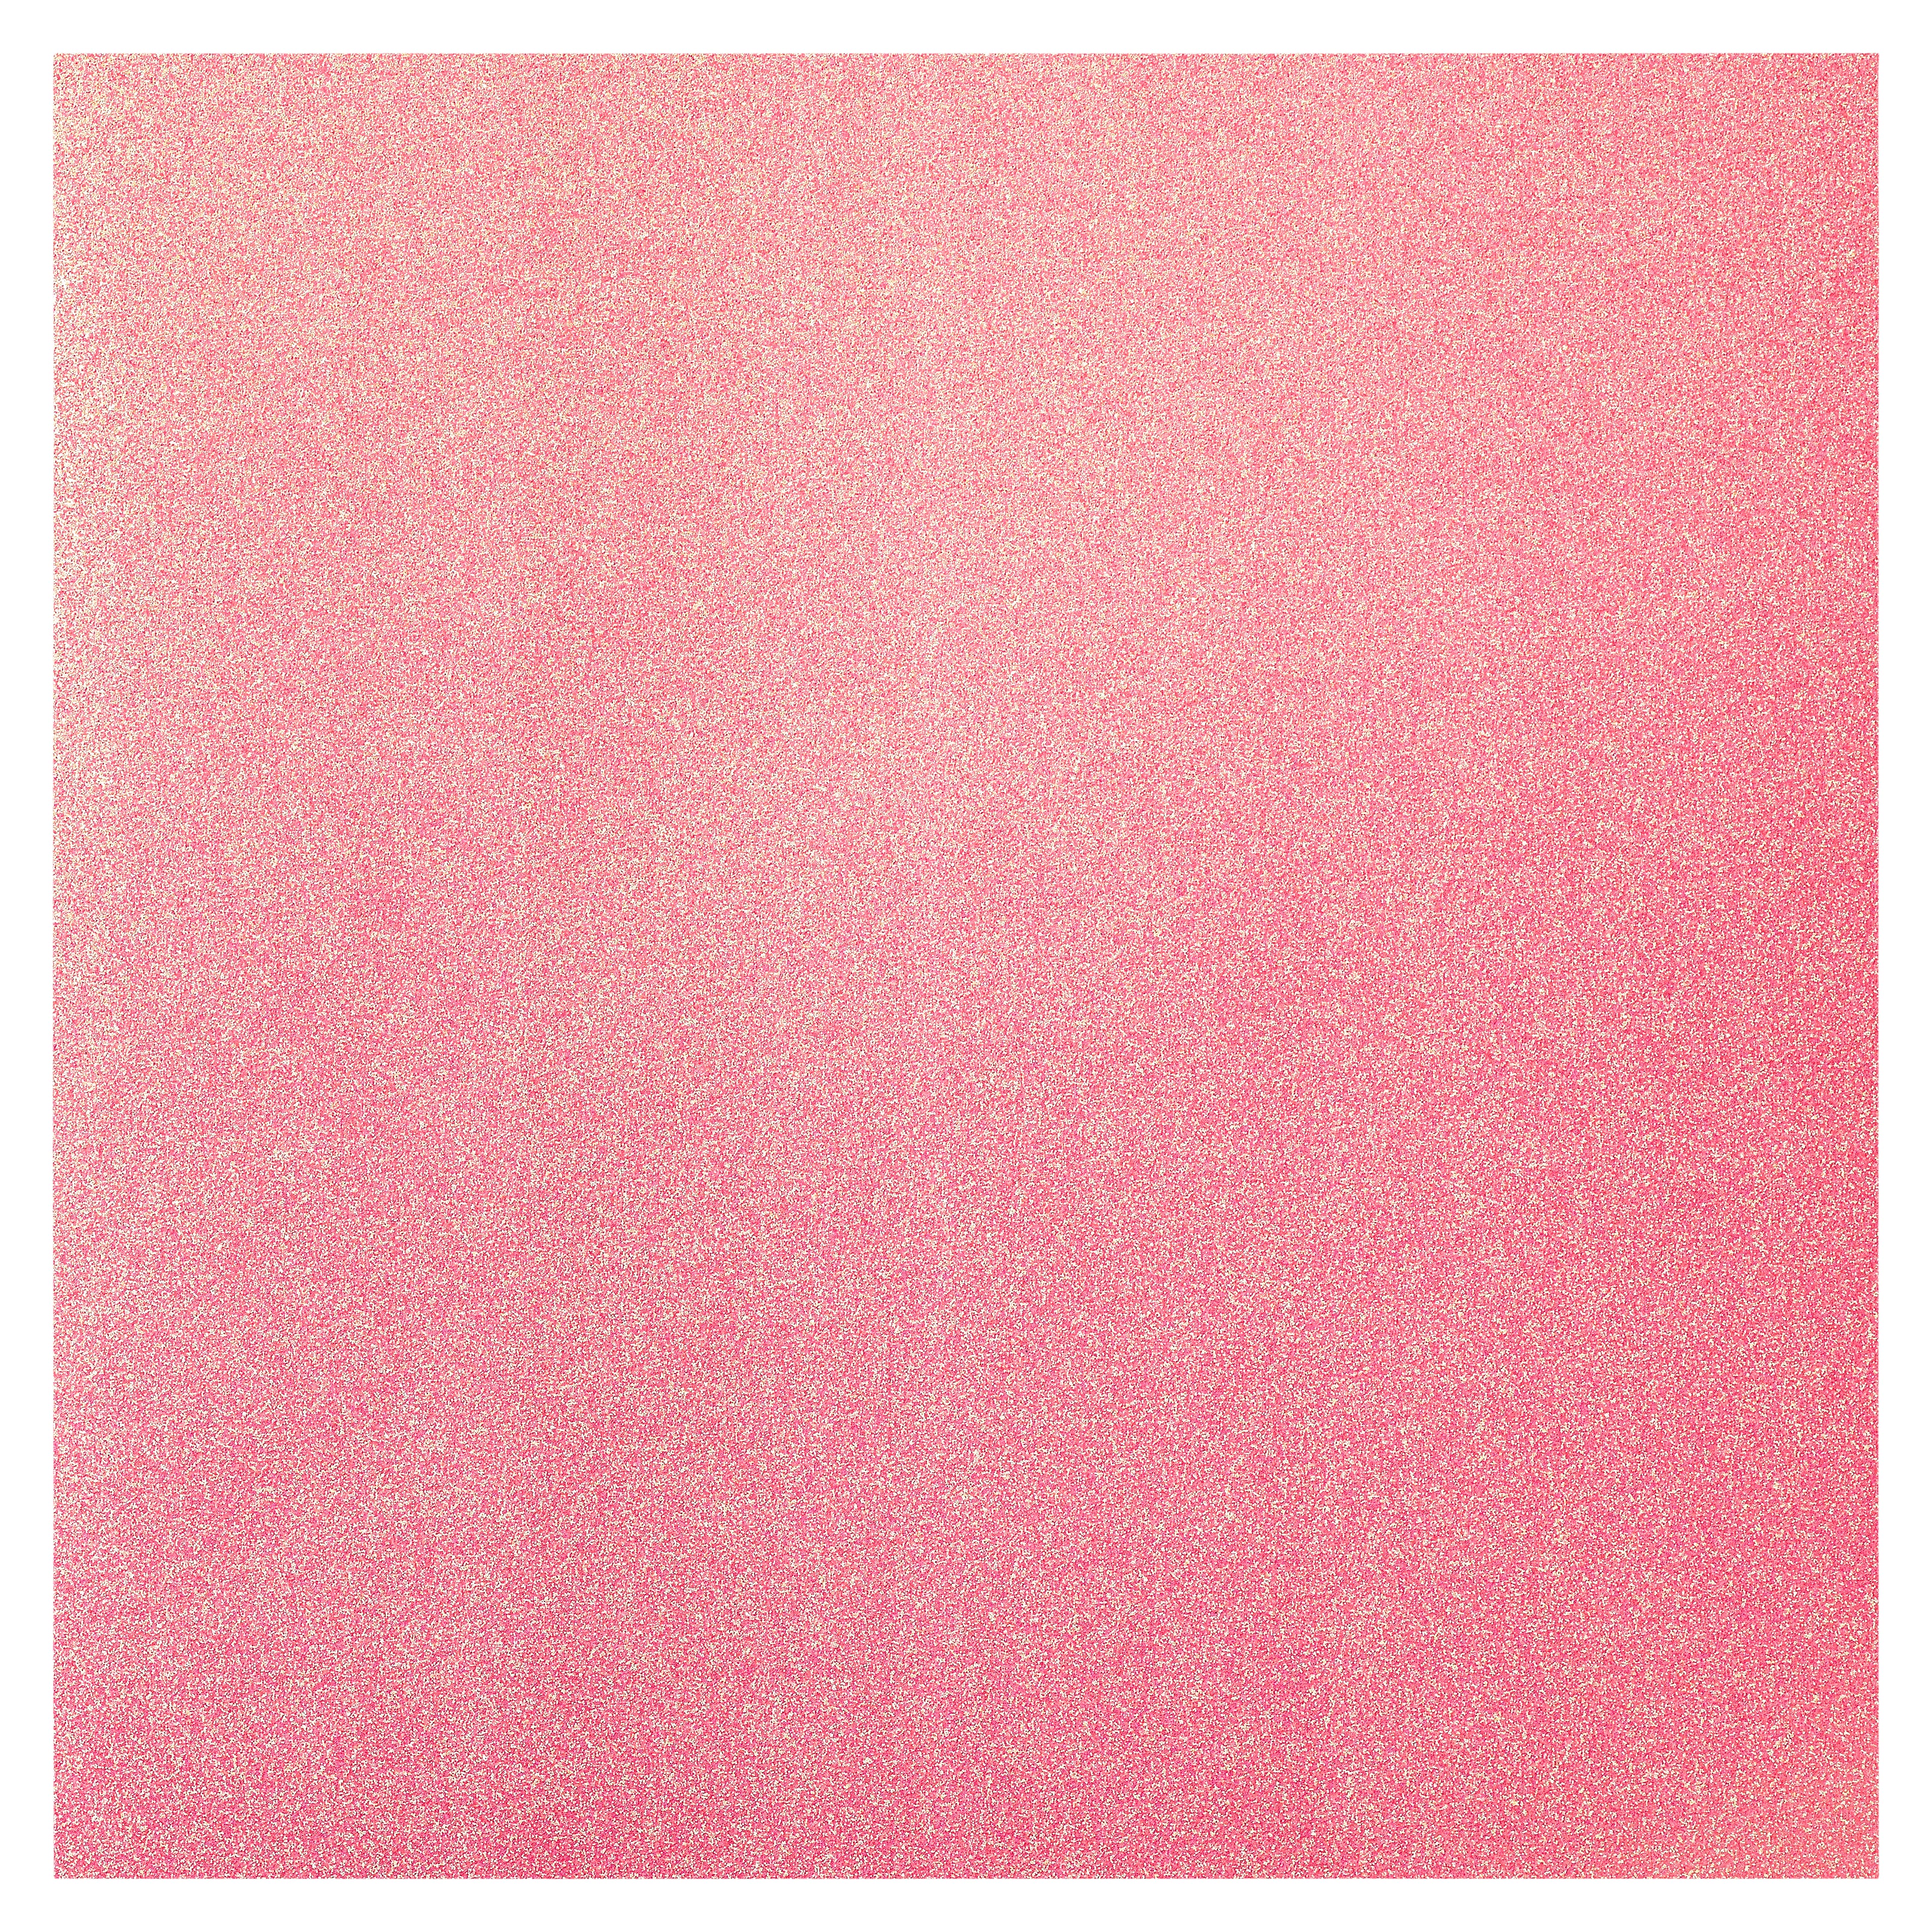 Glitter Cardstock Paper by Recollections™, 12" x 12"